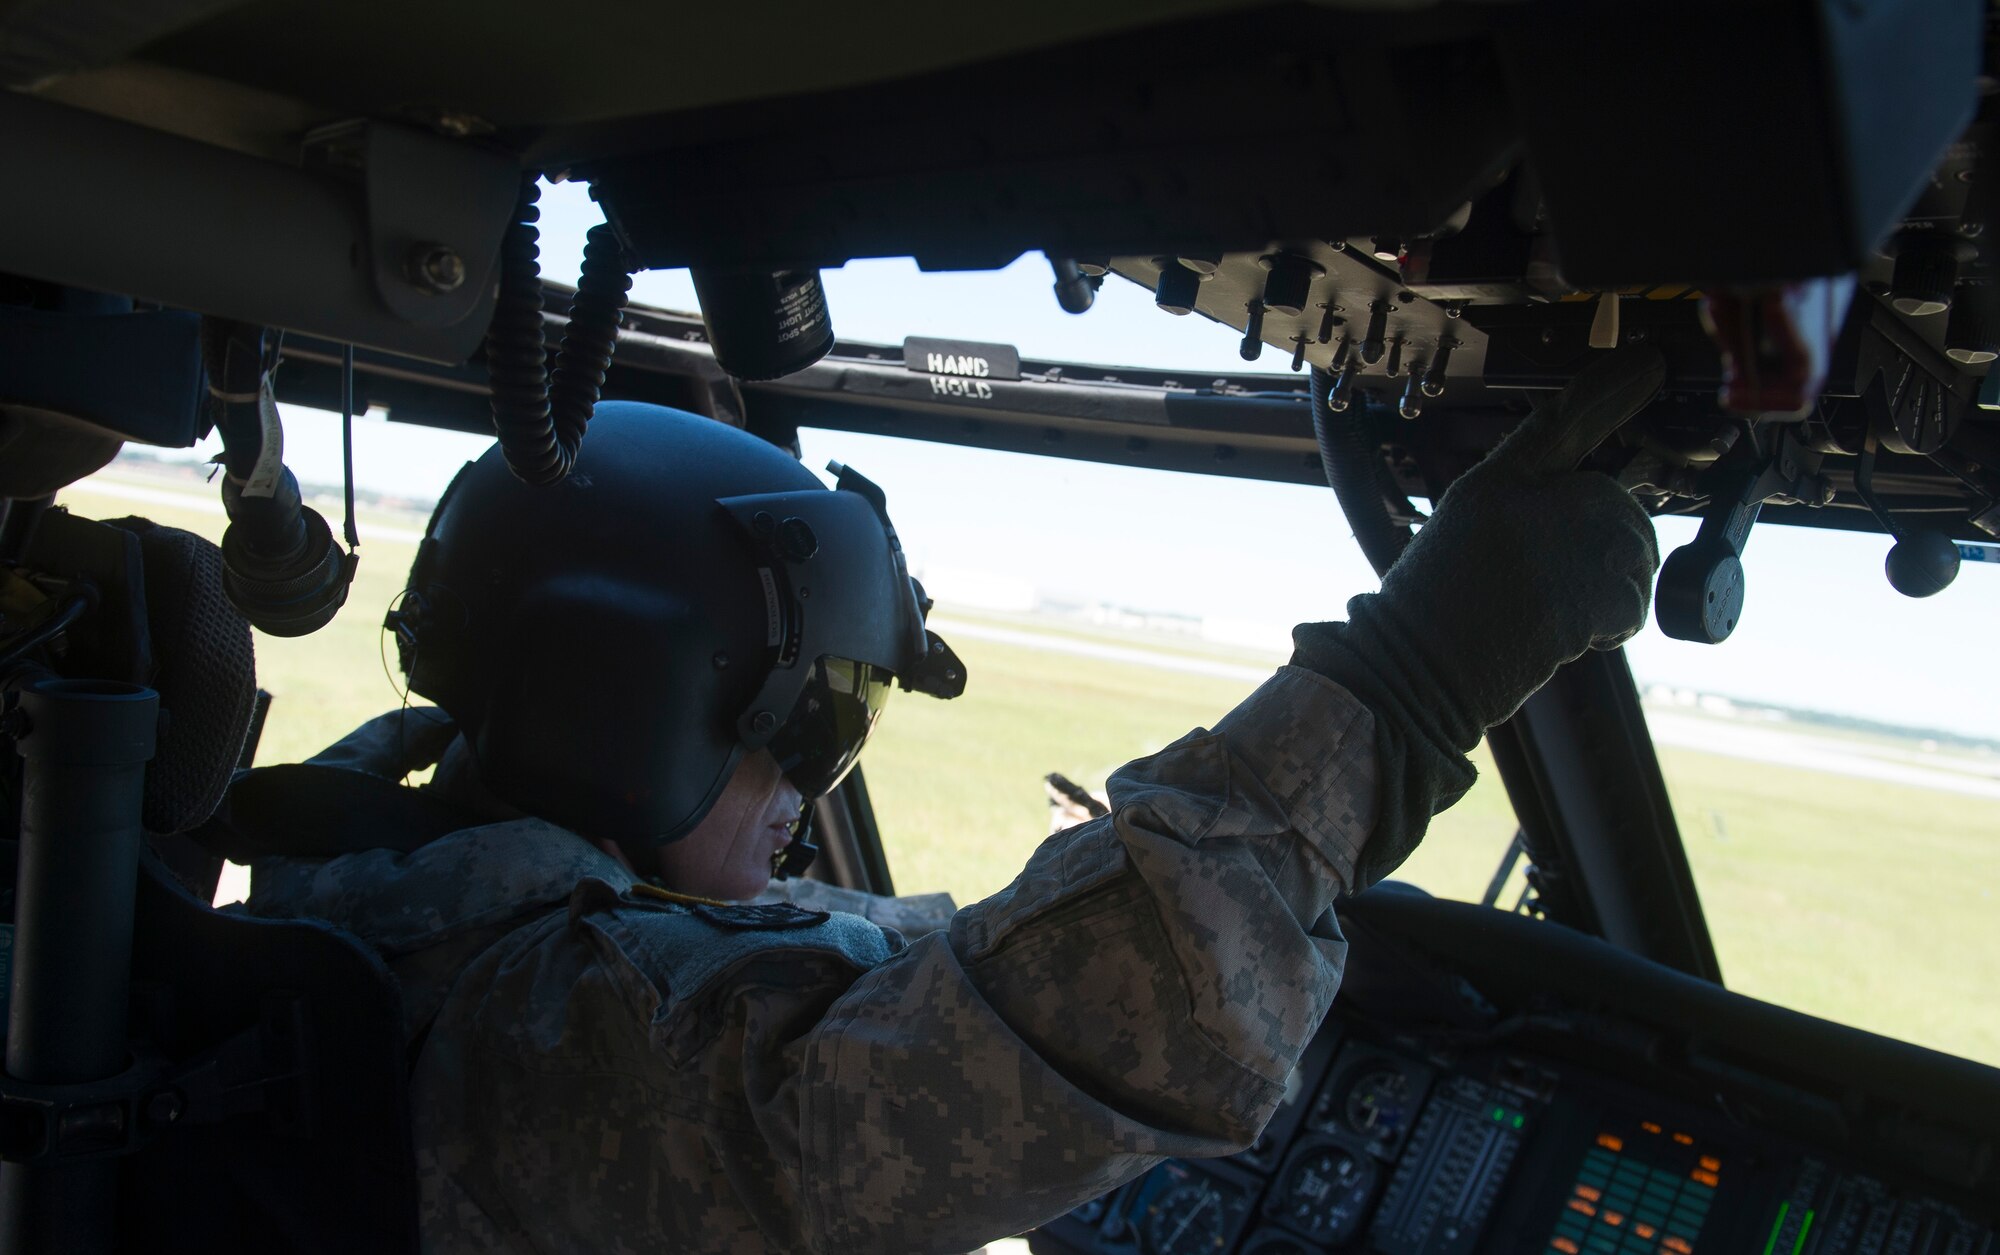 U.S. Army Chief Warrant Officer 4 Sean Reynolds, a pilot assigned to 2nd Battalion, 151st Brigade, South Carolina National Guard, prepares to fly a UH-60 Blackhawk over Joint Base Charleston, S.C., for an aerial damage assessment after Hurricane Matthew swept the area Oct. 9, 2016. All non-essential personnel evacuated the area, but returned after disaster response coordinators assessed damage and verified a safe operating environment. 